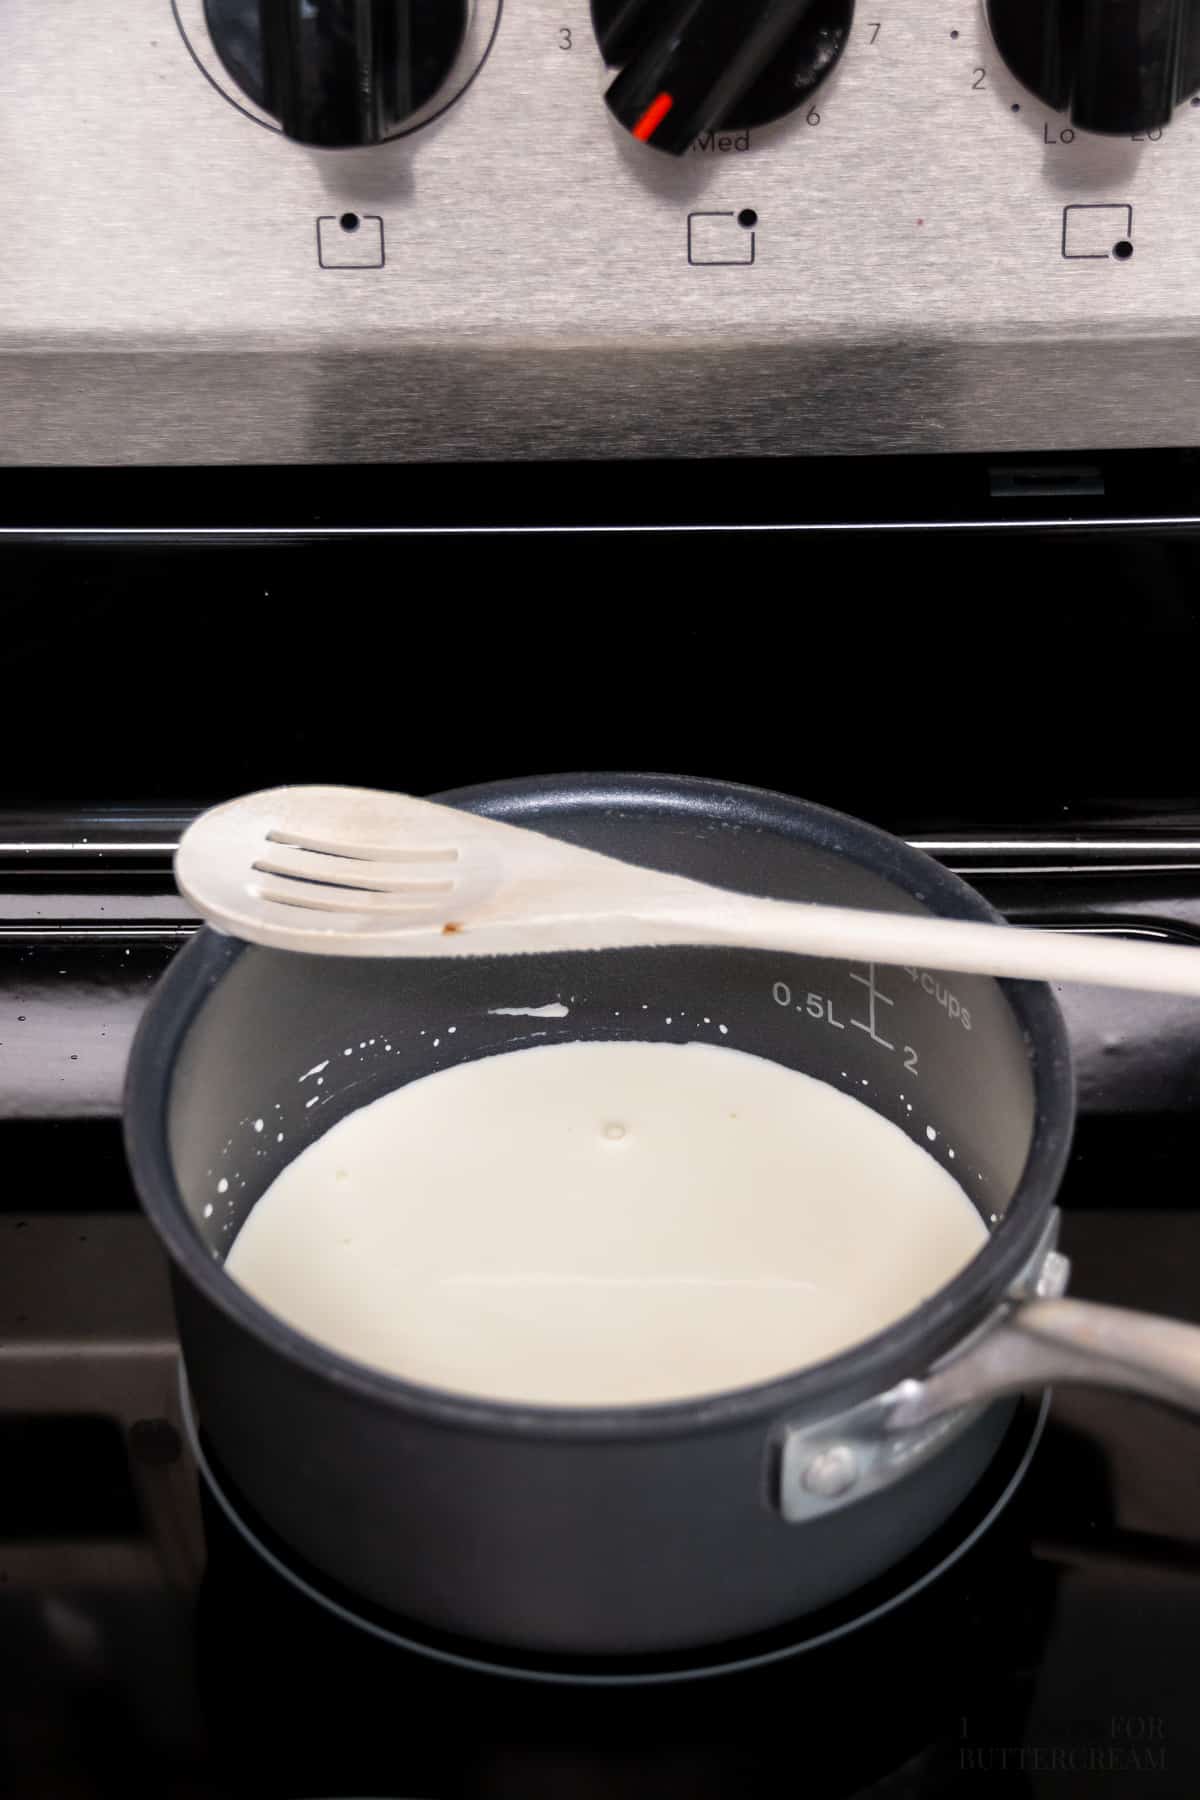 Heated heavy cream in a saucepan on a stove.